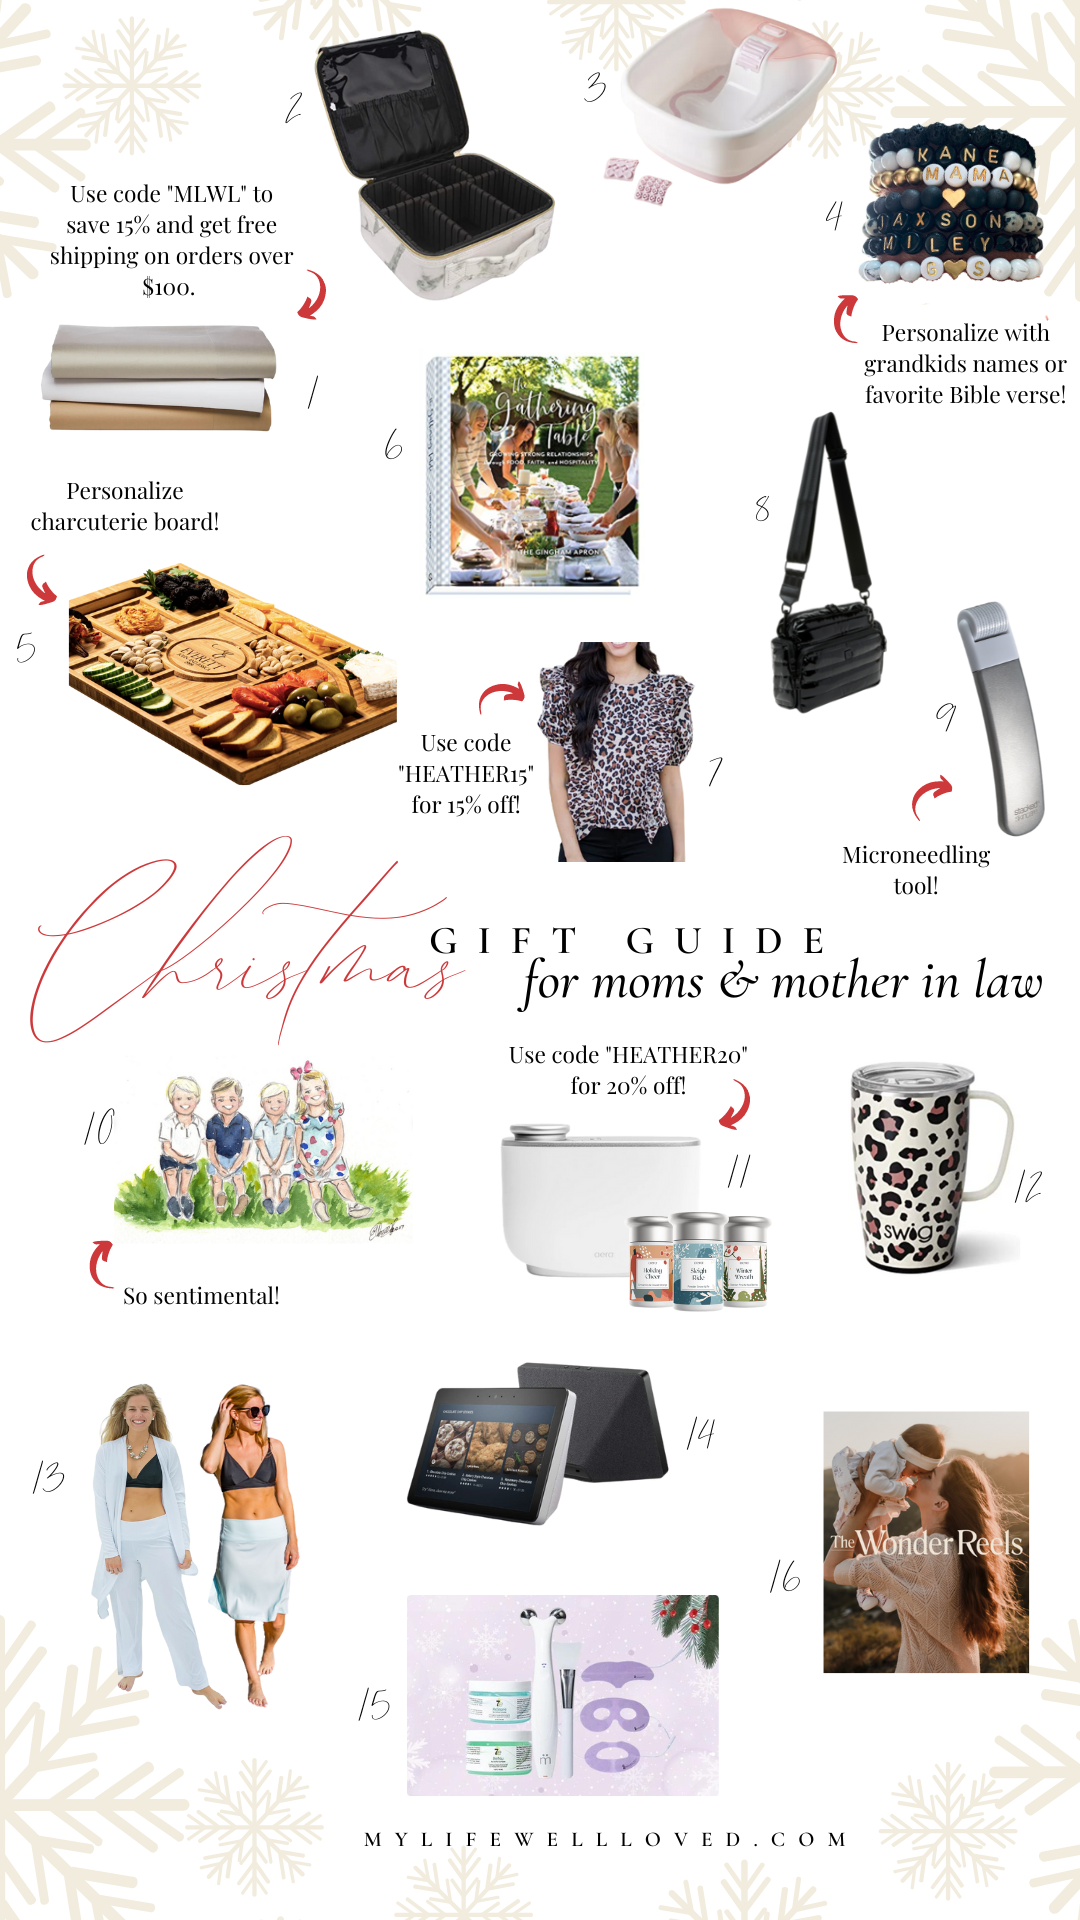 Gift Ideas for Mother-in-Law + Mom  Mother christmas gifts, In law christmas  gifts, Christmas gifts for mom